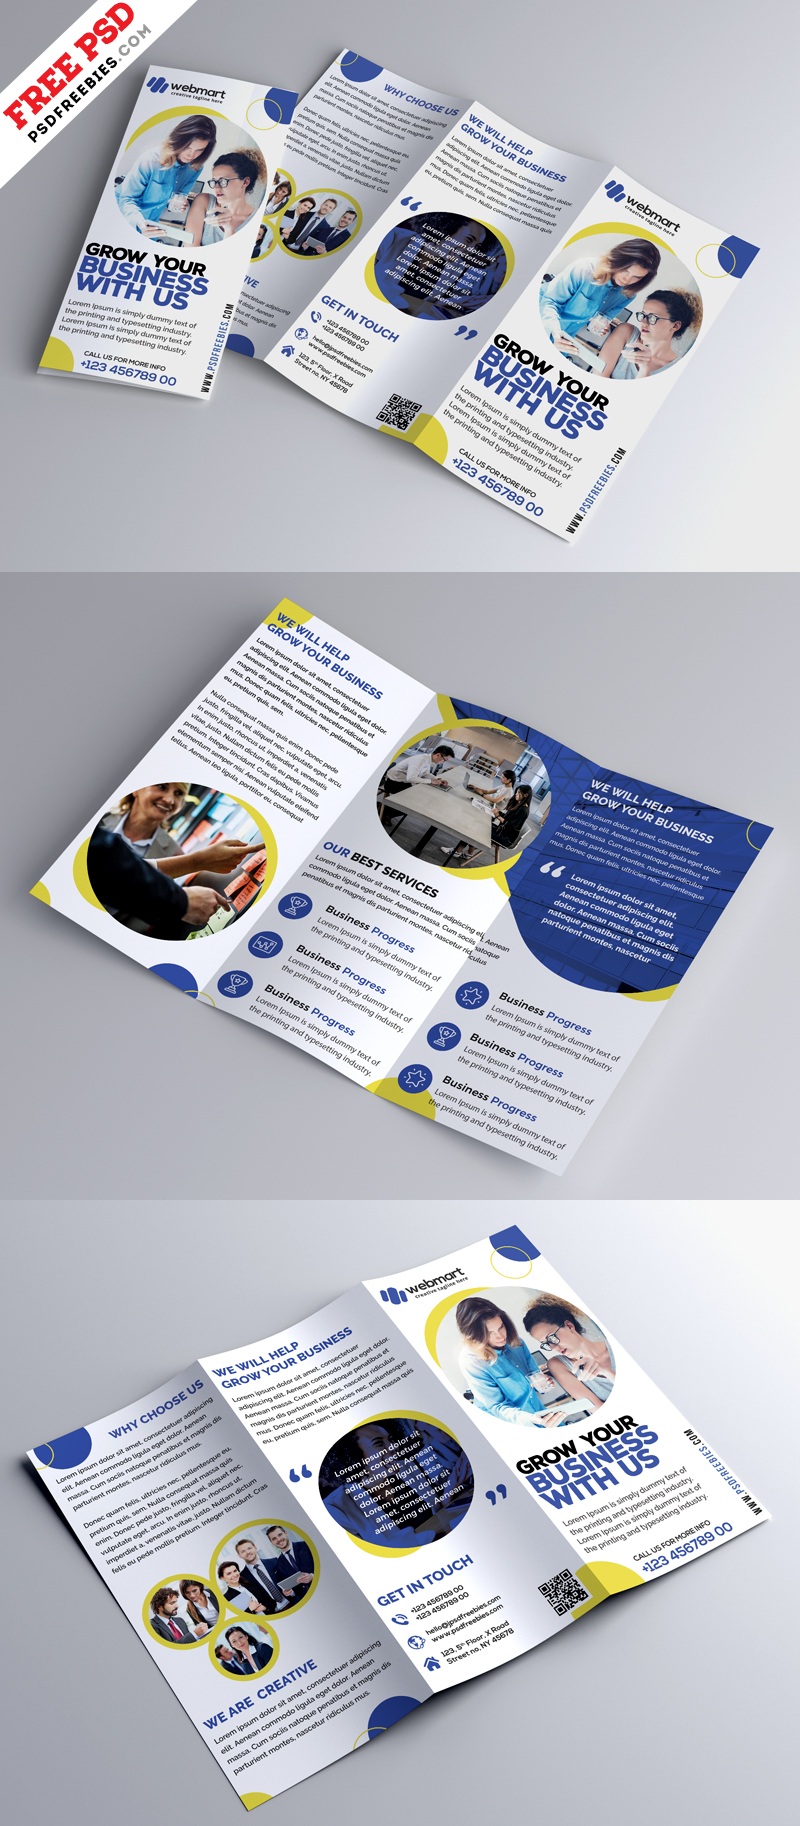 Business Trifold Brochure Design PSD Free Download